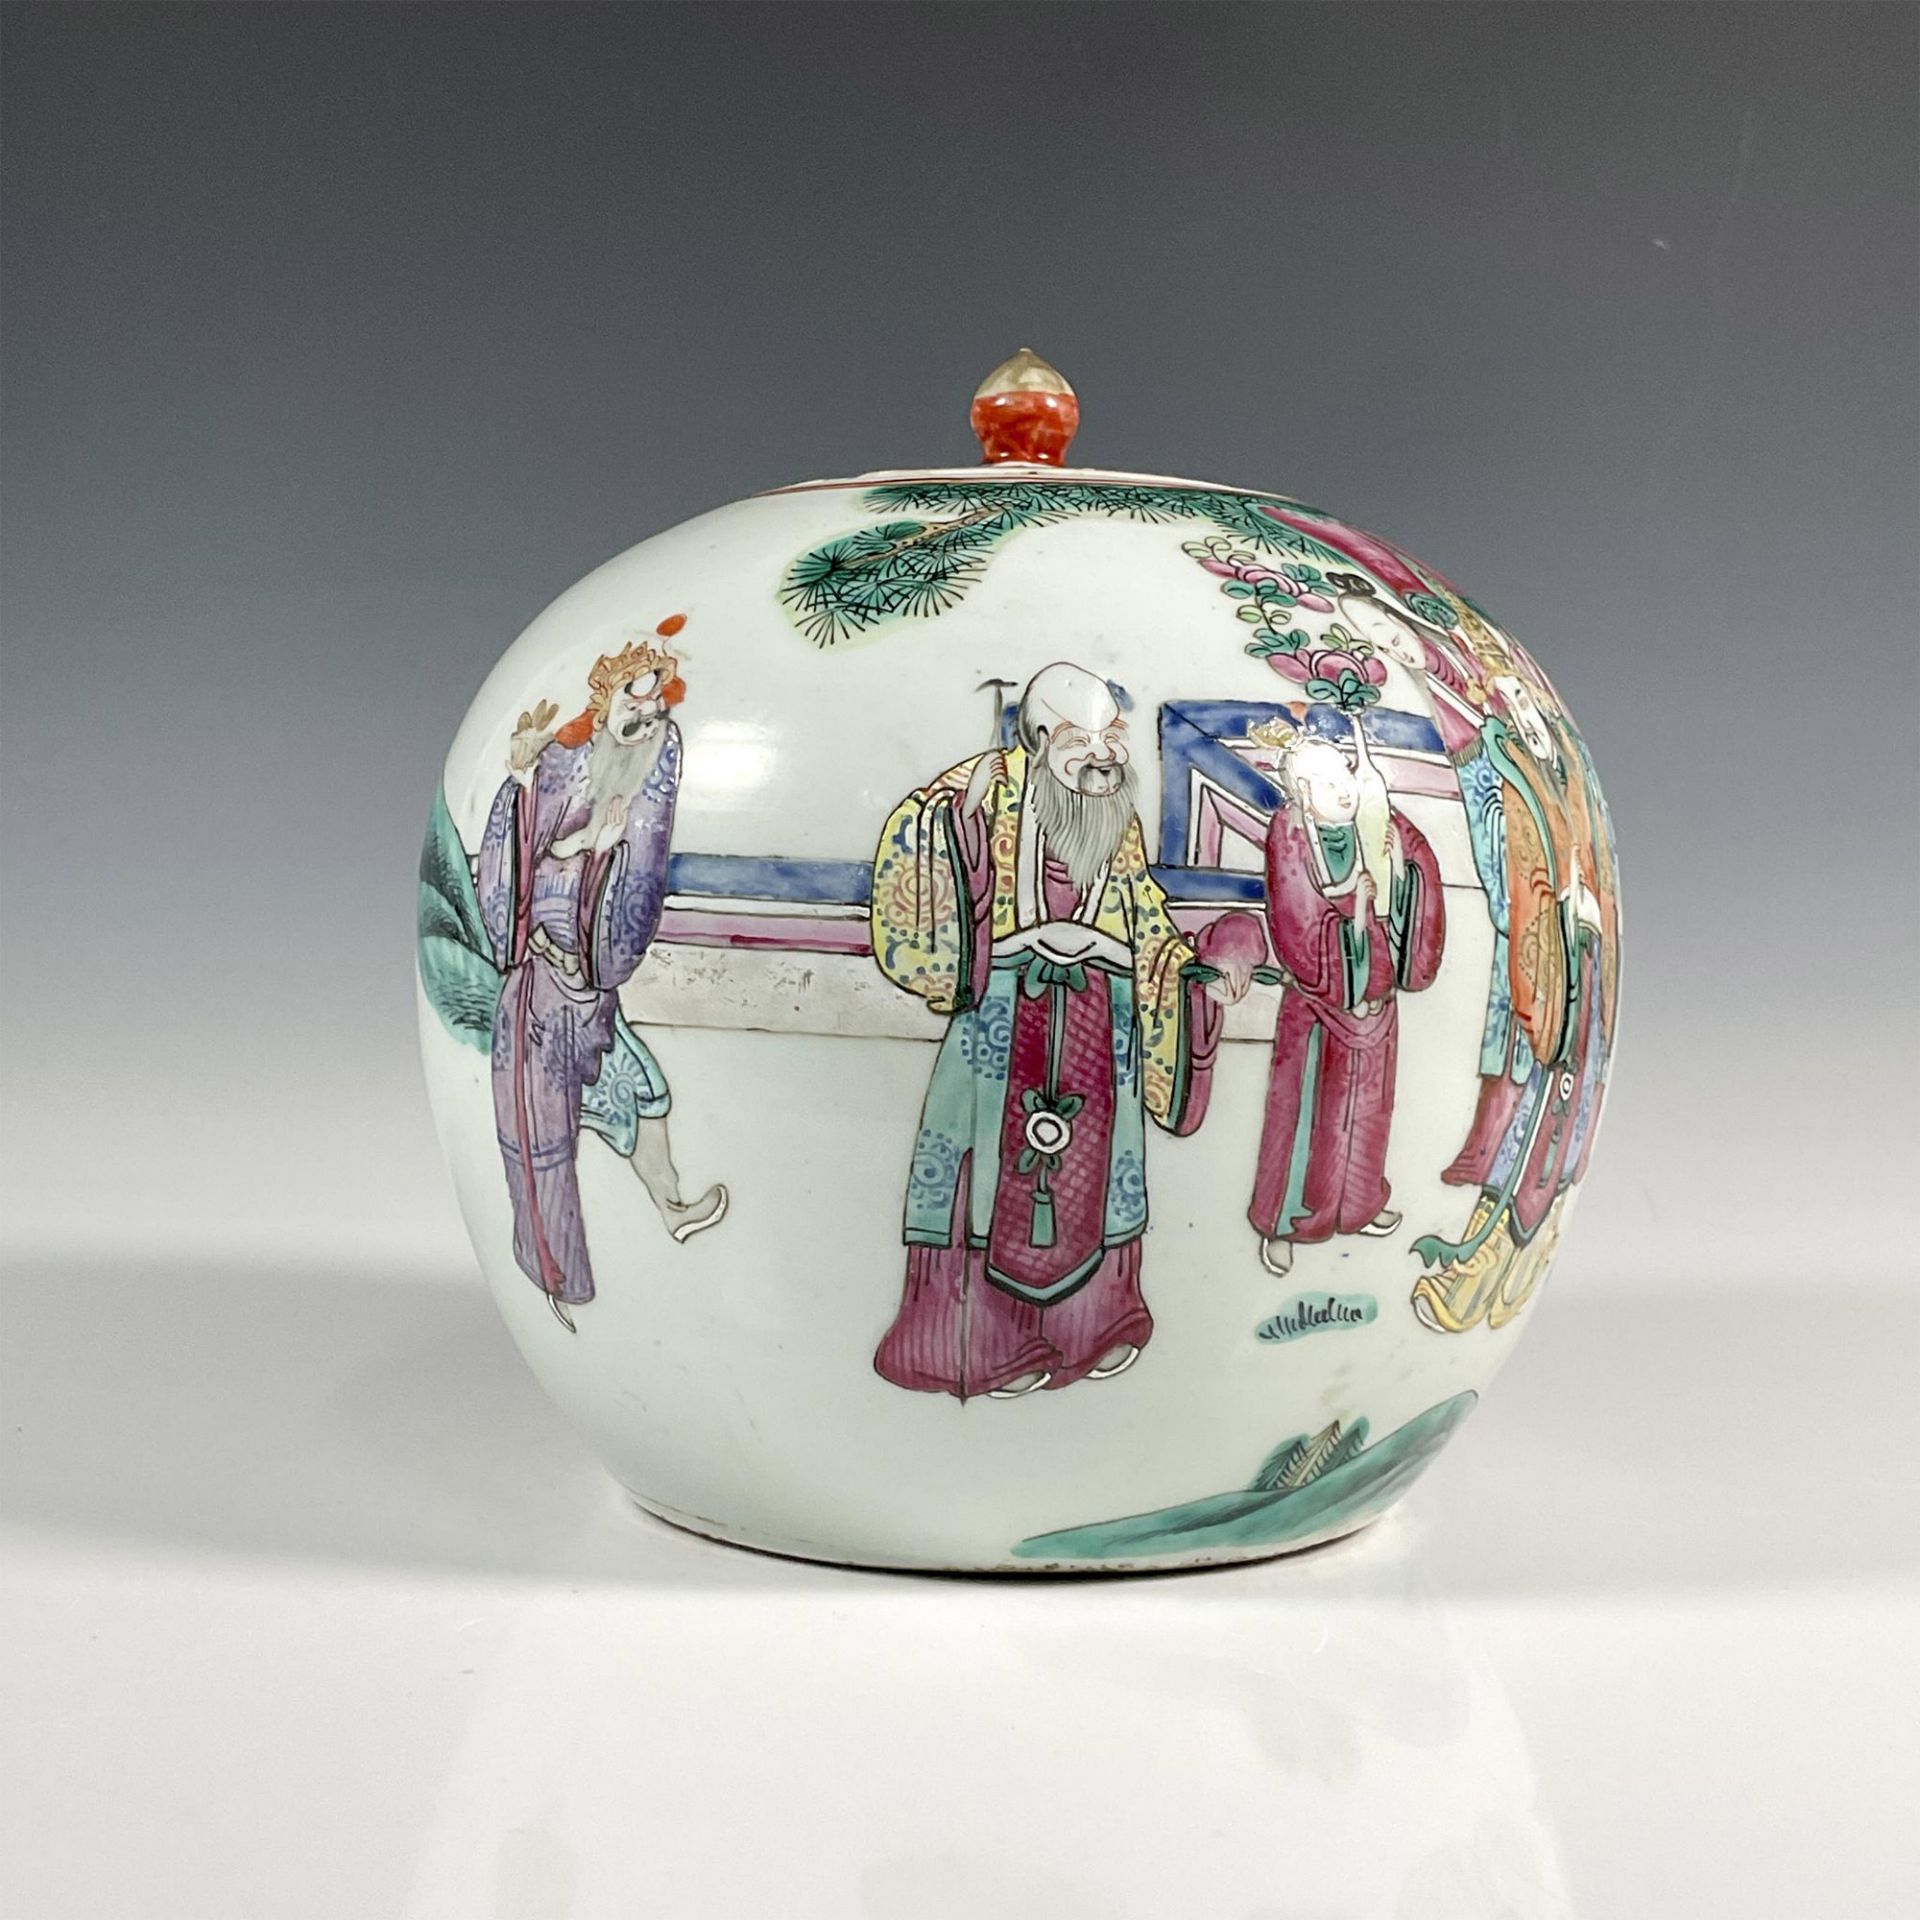 Chinese Qing Dynasty Porcelain Covered Ginger Pot - Image 5 of 5